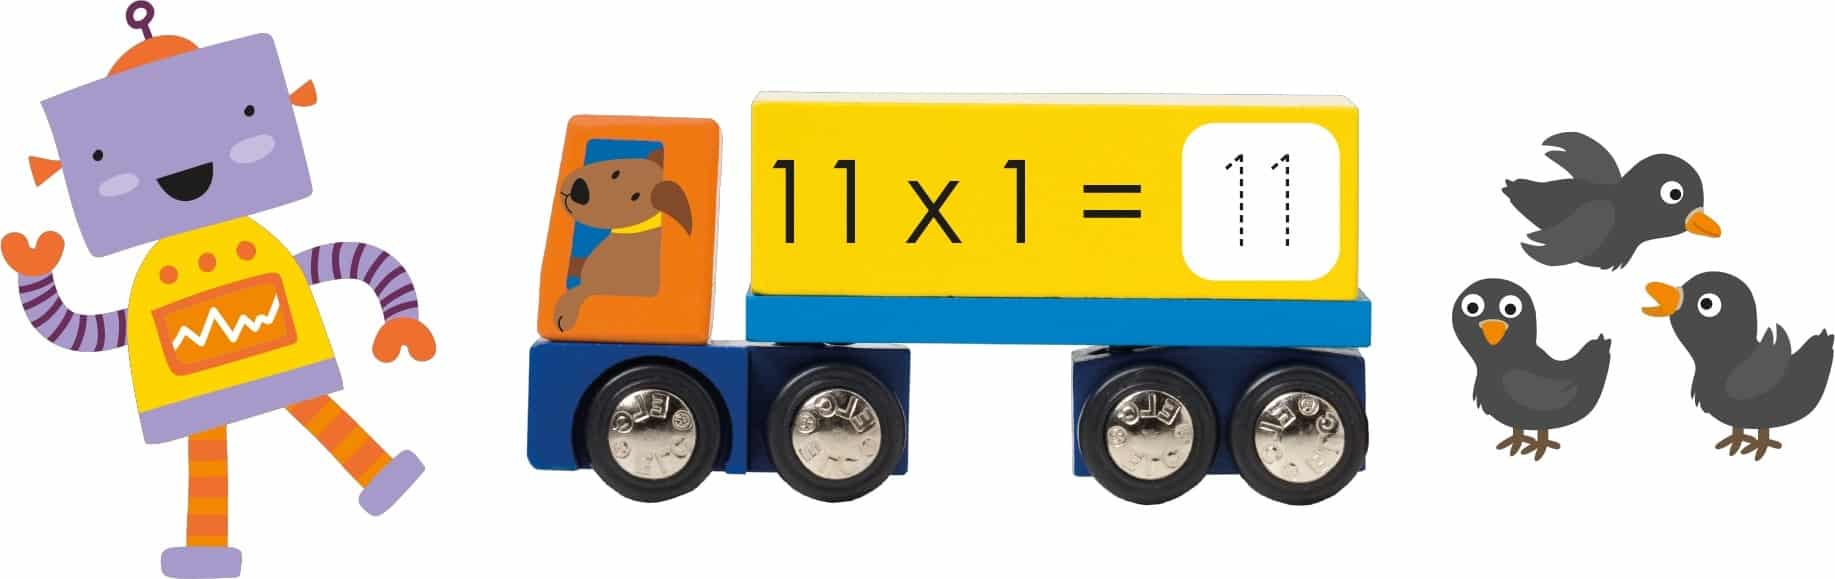 Colorful toy collection featuring a robot, a truck with a math equation, and three cartoonish birds, arranged from left to right on a white background.